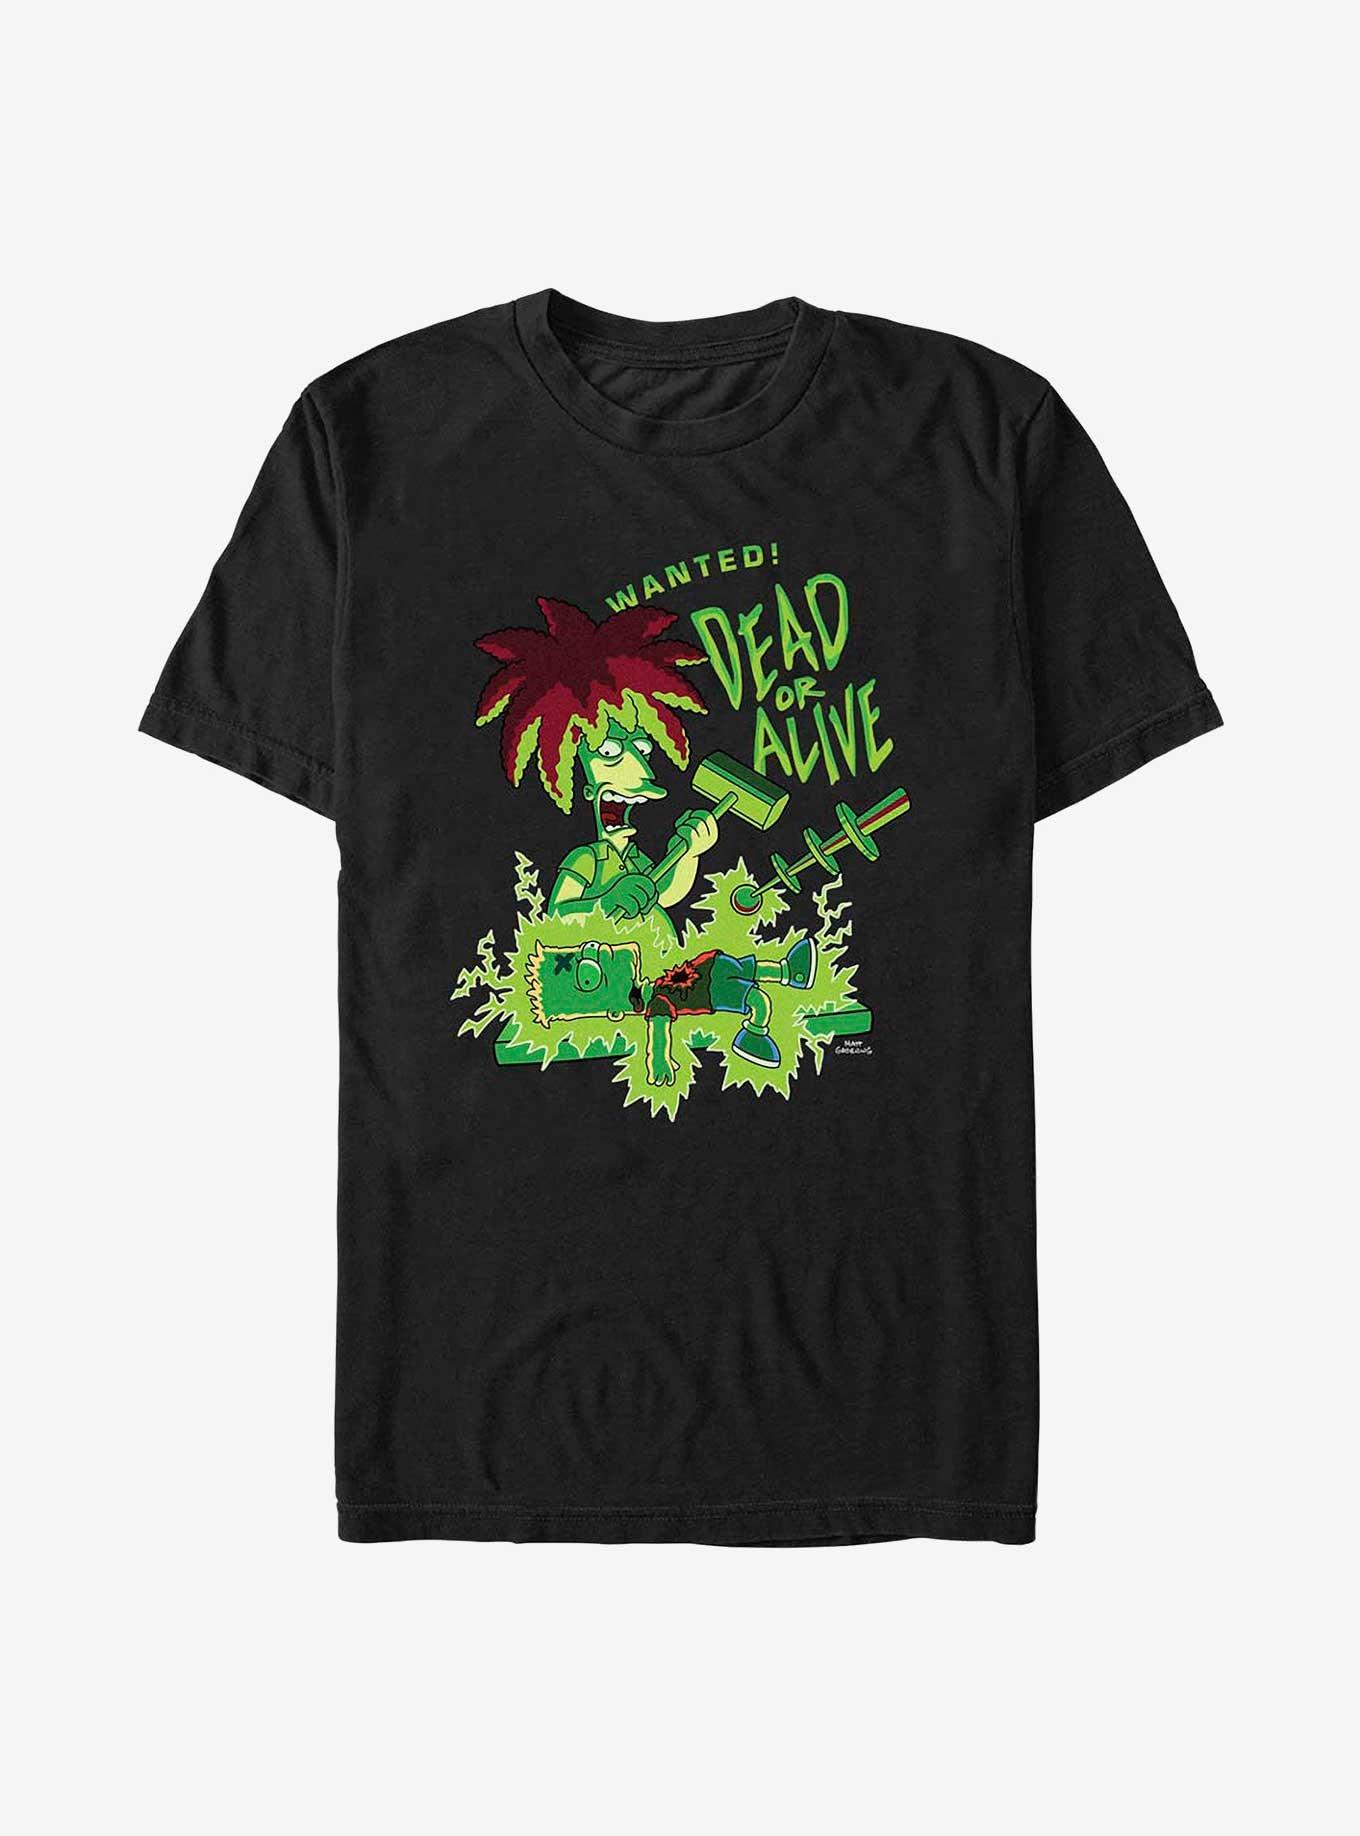 The Simpsons Bart Wanted Dead or Alive T-Shirt, BLACK, hi-res